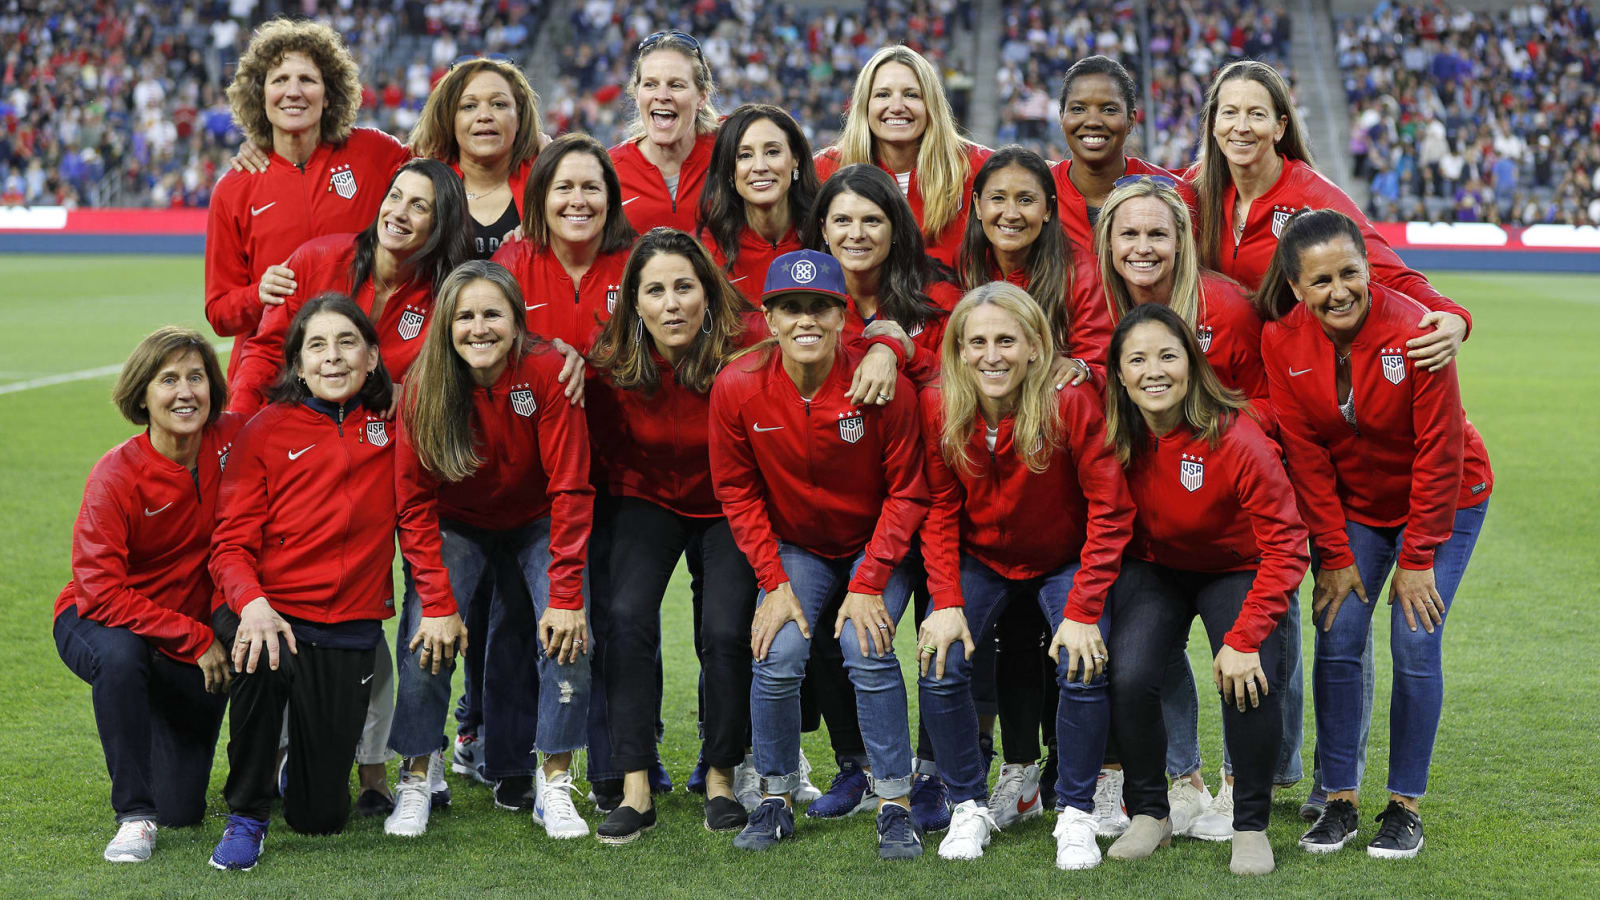 Where are they now? The 1999 U.S. Women's World Cup team